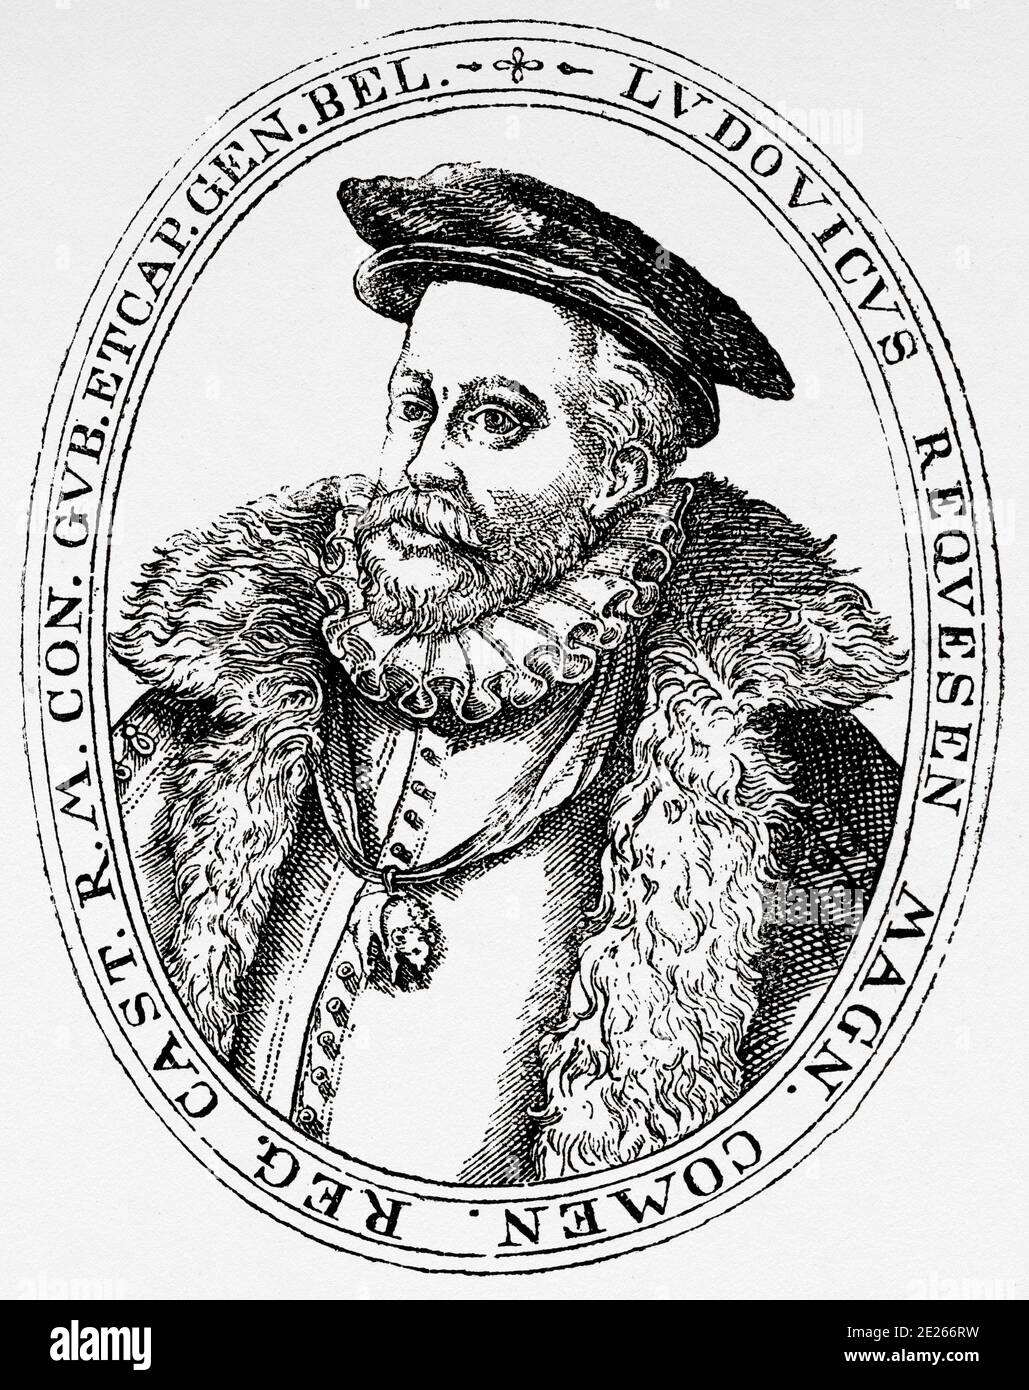 Portrait of Luis de Requesens y Zúñiga (Barcelona, August 25, 1528 - Brussels, March 5, 1576) was a Spanish military, sailor, diplomat and politician, governor of the State of Milan and the Netherlands. Mentor of Don Juan of Austria, his work was fundamental for the great victory of the Holy League in the battle of Lepanto. And he was also Major Commander of Castile in the Order of Santiago. History of Philip II of Spain. Old engraving published in Historia de Felipe II by H. Forneron, in 1884 Stock Photo